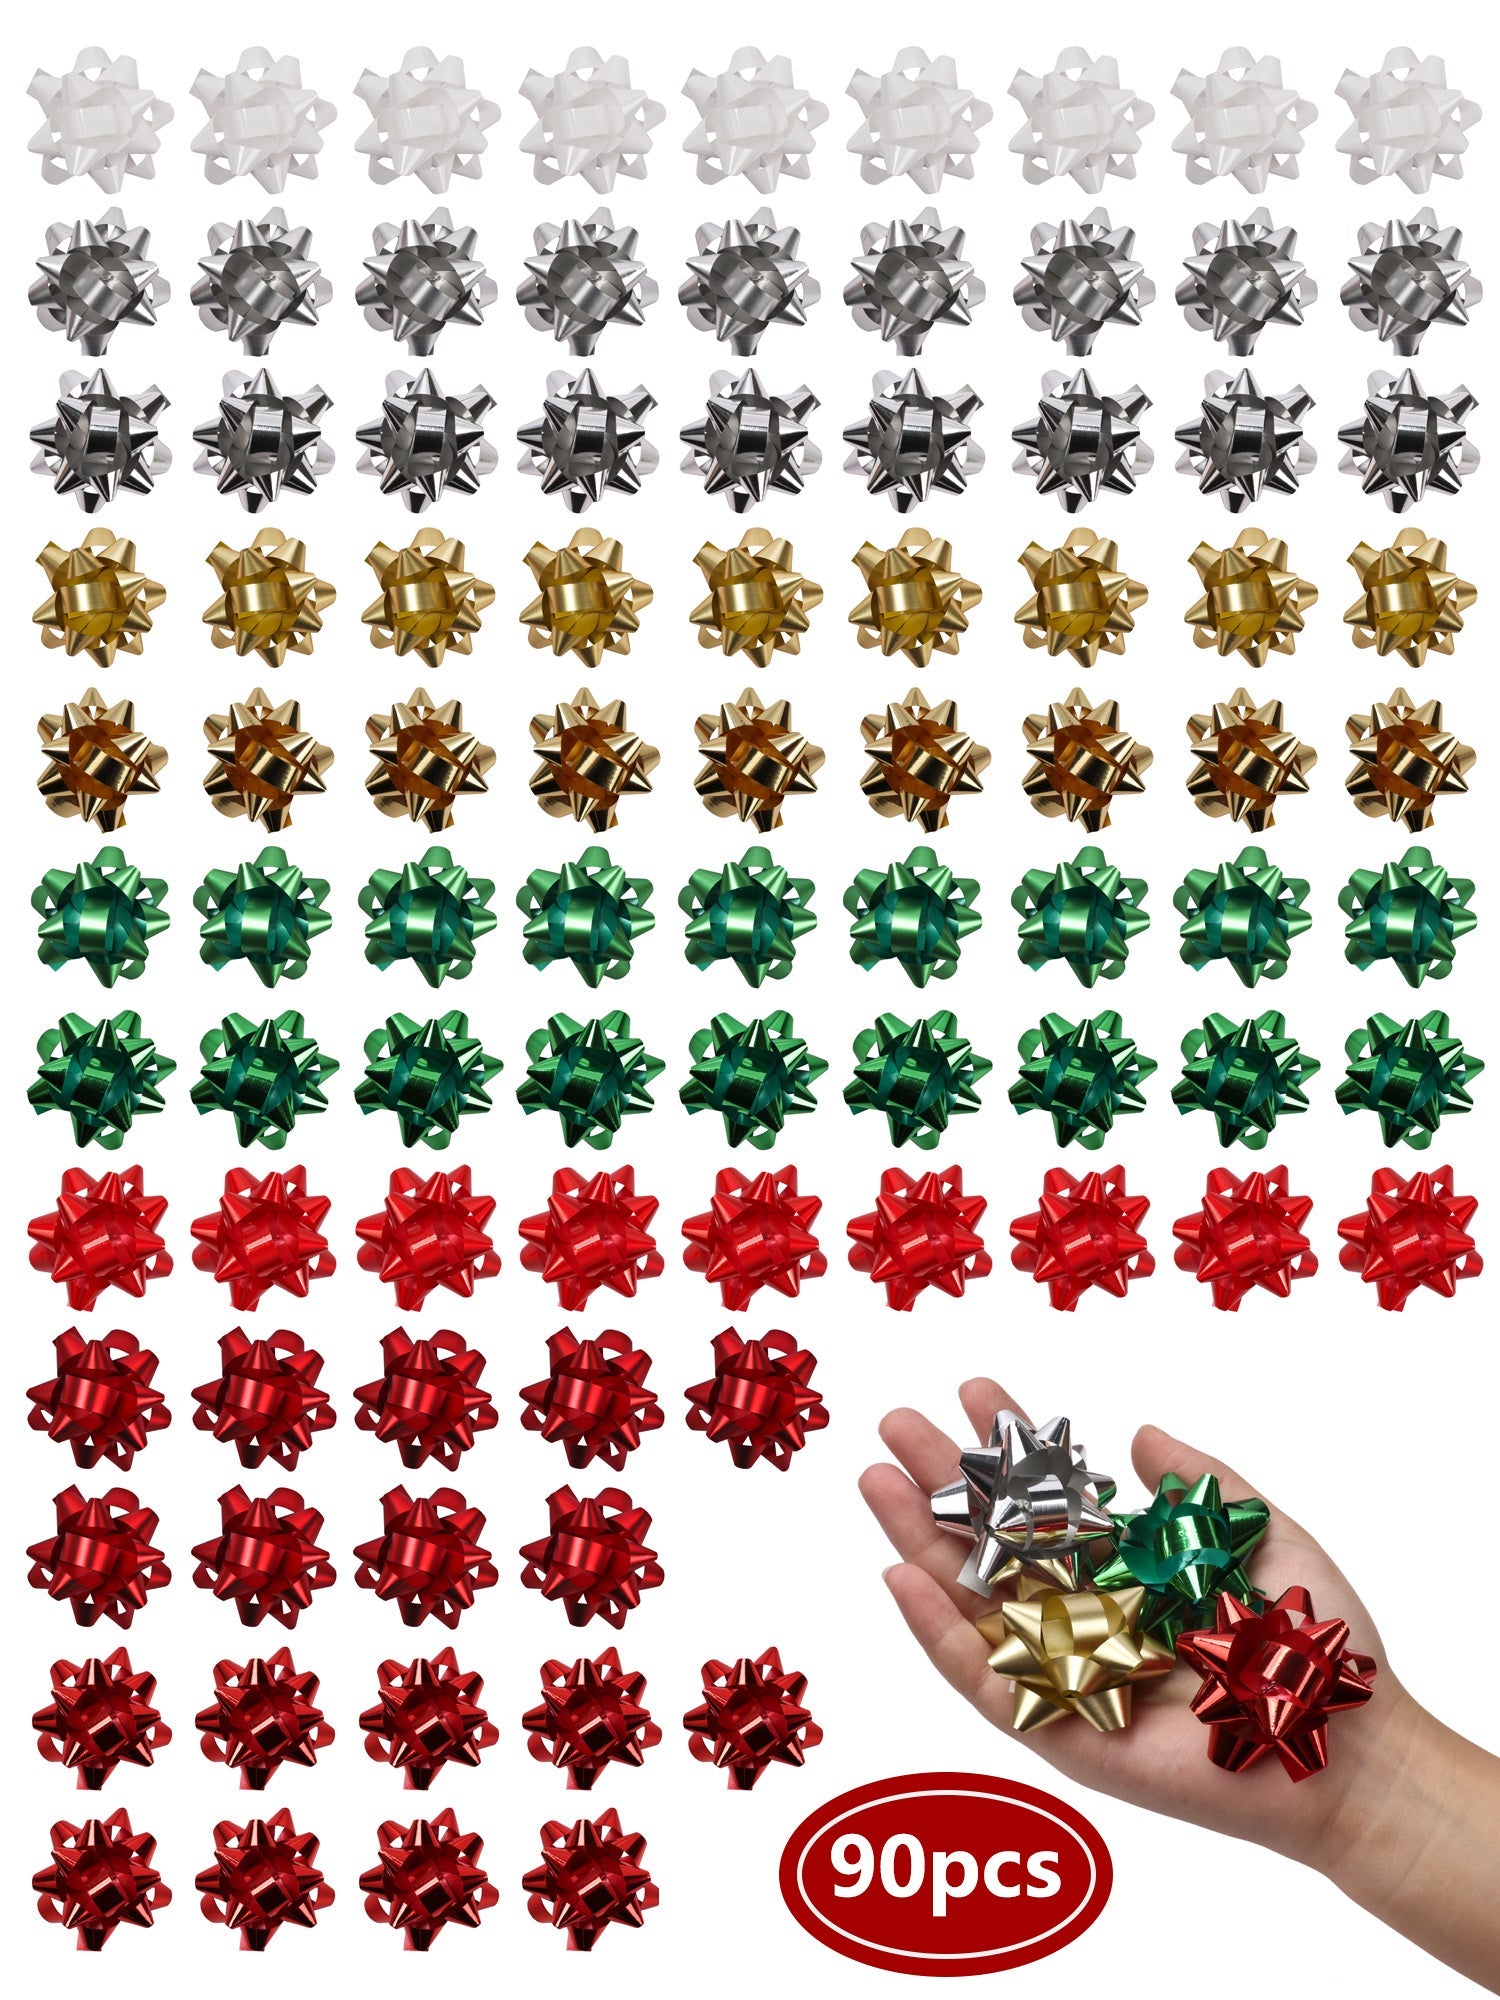 2" Christmas Star Gift Bow Bundle - White/Silver/Gold/Green/Red -  90 pcs